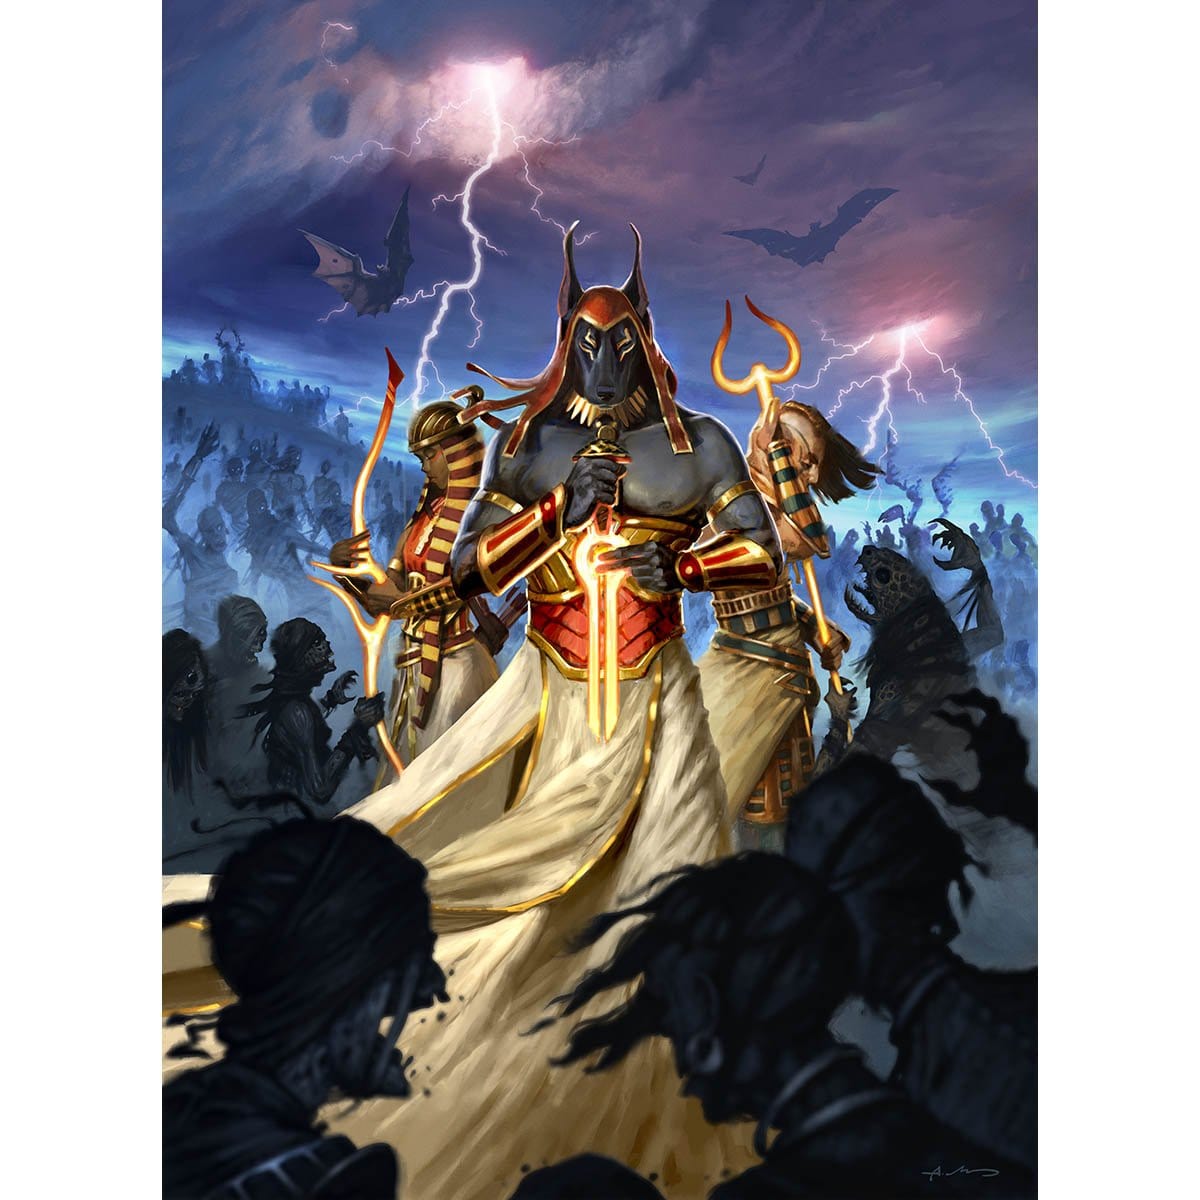 Pay Tribute to Me Print - Print - Original Magic Art - Accessories for Magic the Gathering and other card games